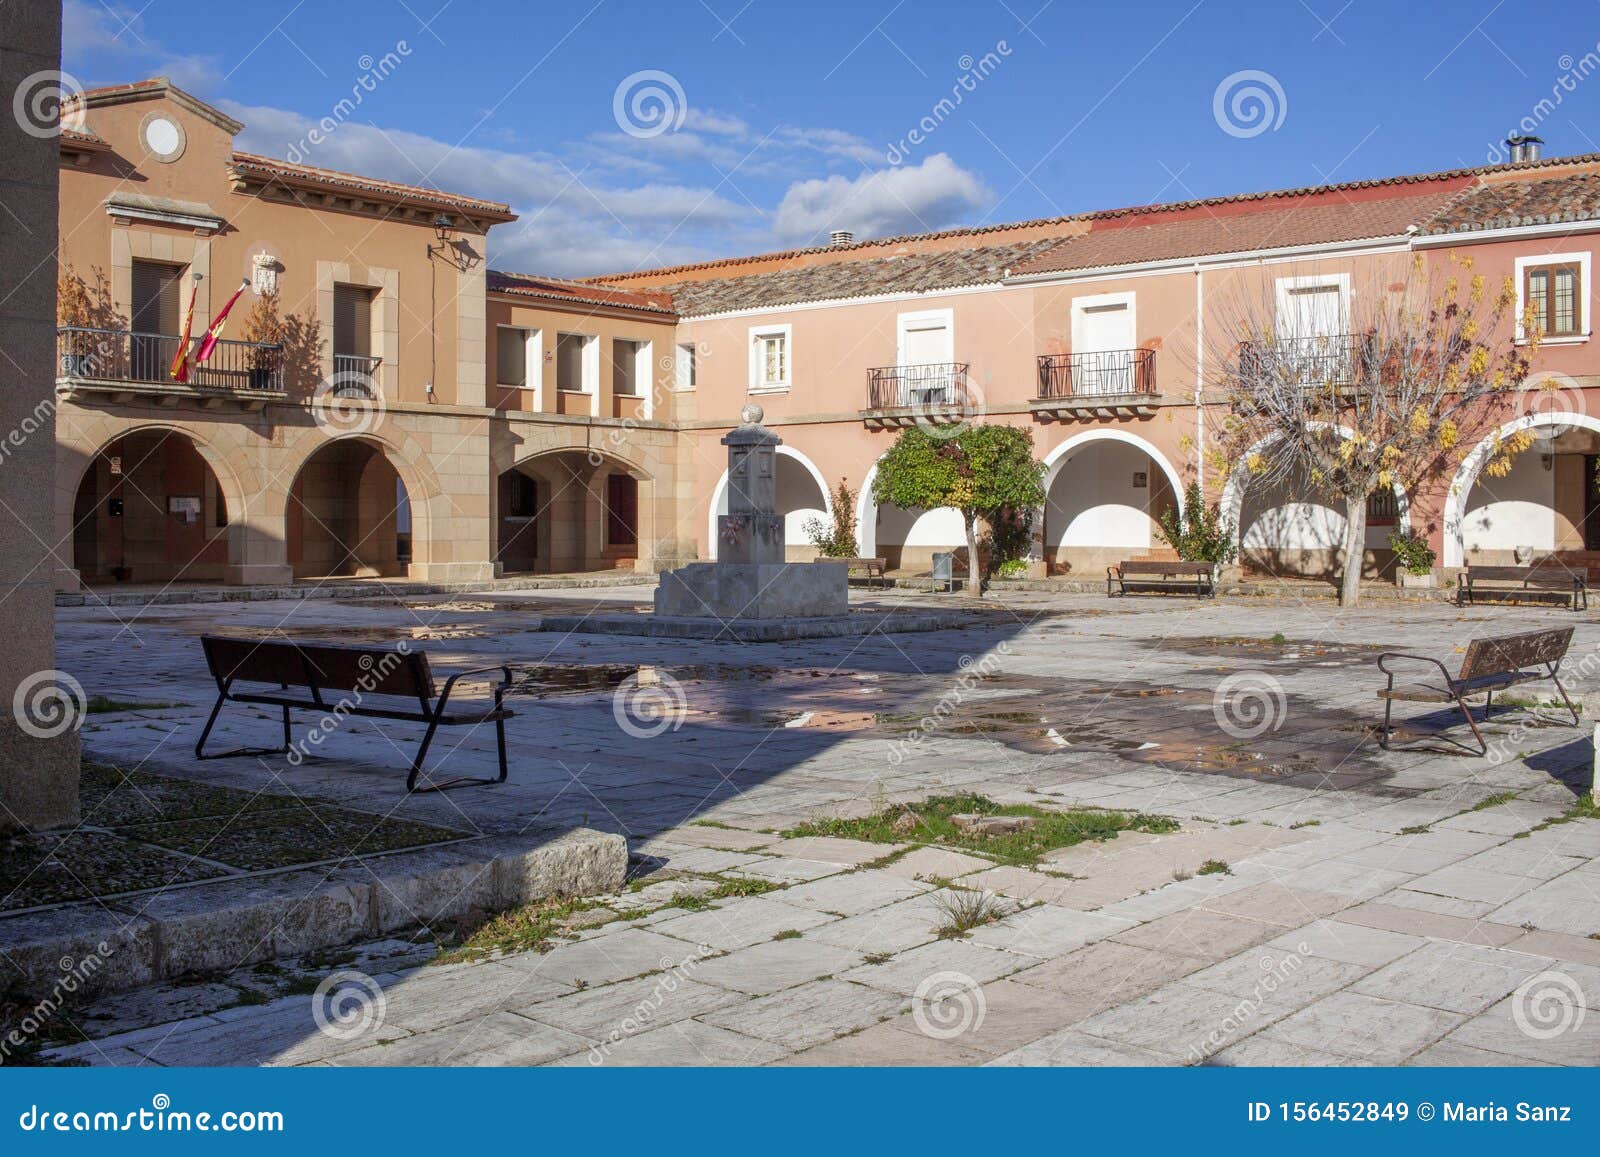 empty square in an interior town